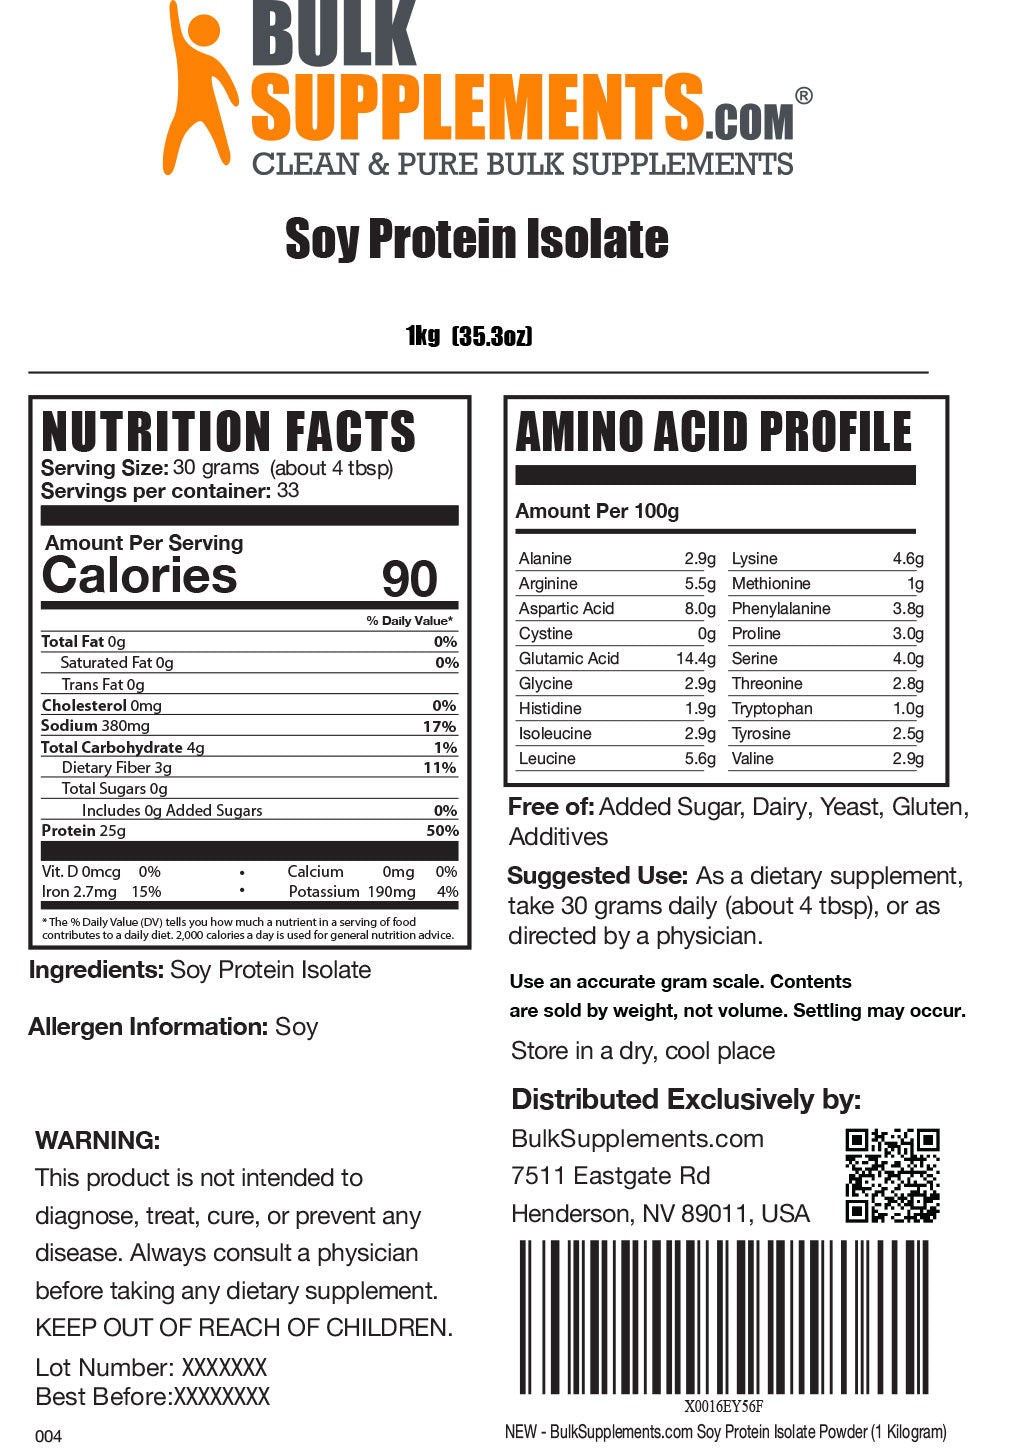 Soy protein isolate powder label 1kg